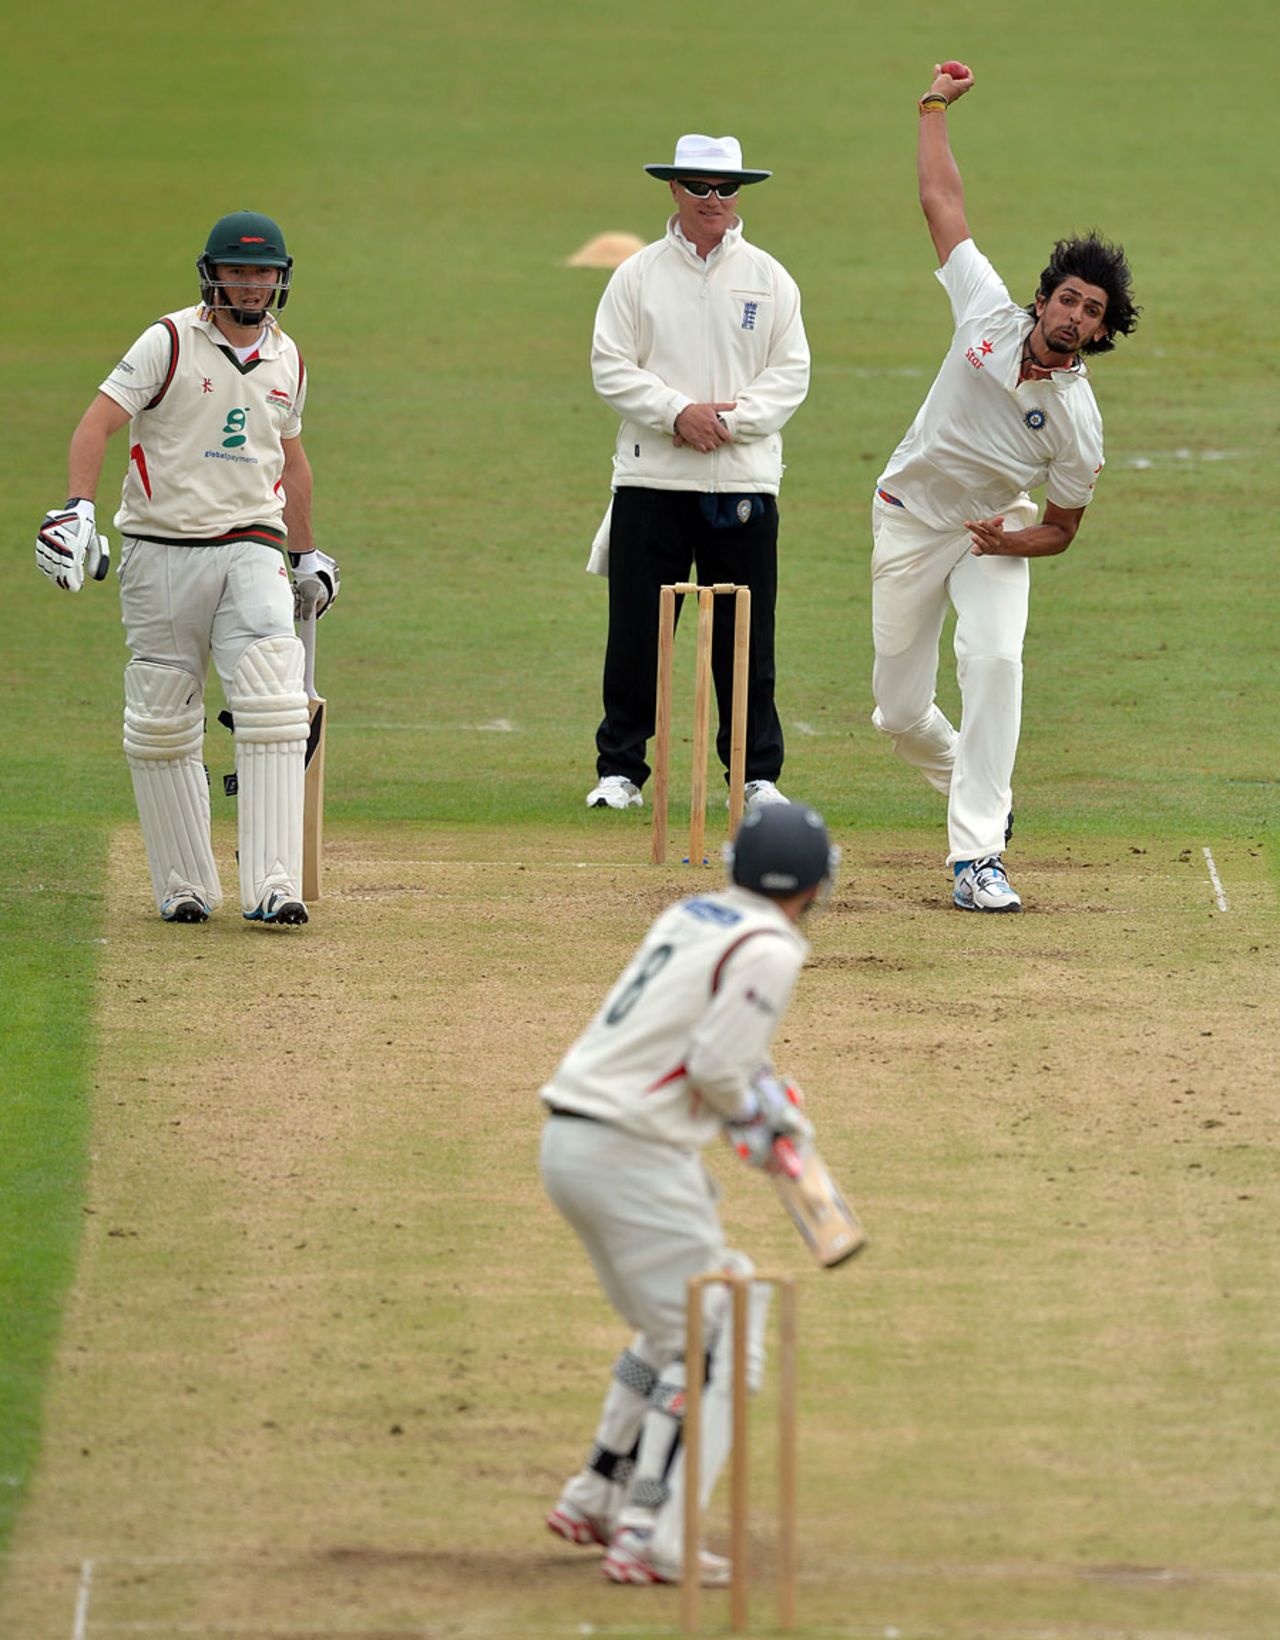 Ishant Sharma bowls to Greg Smith, Leicestershire v Indians, Tour match, Grace Road, 3rd day, June 28, 2014